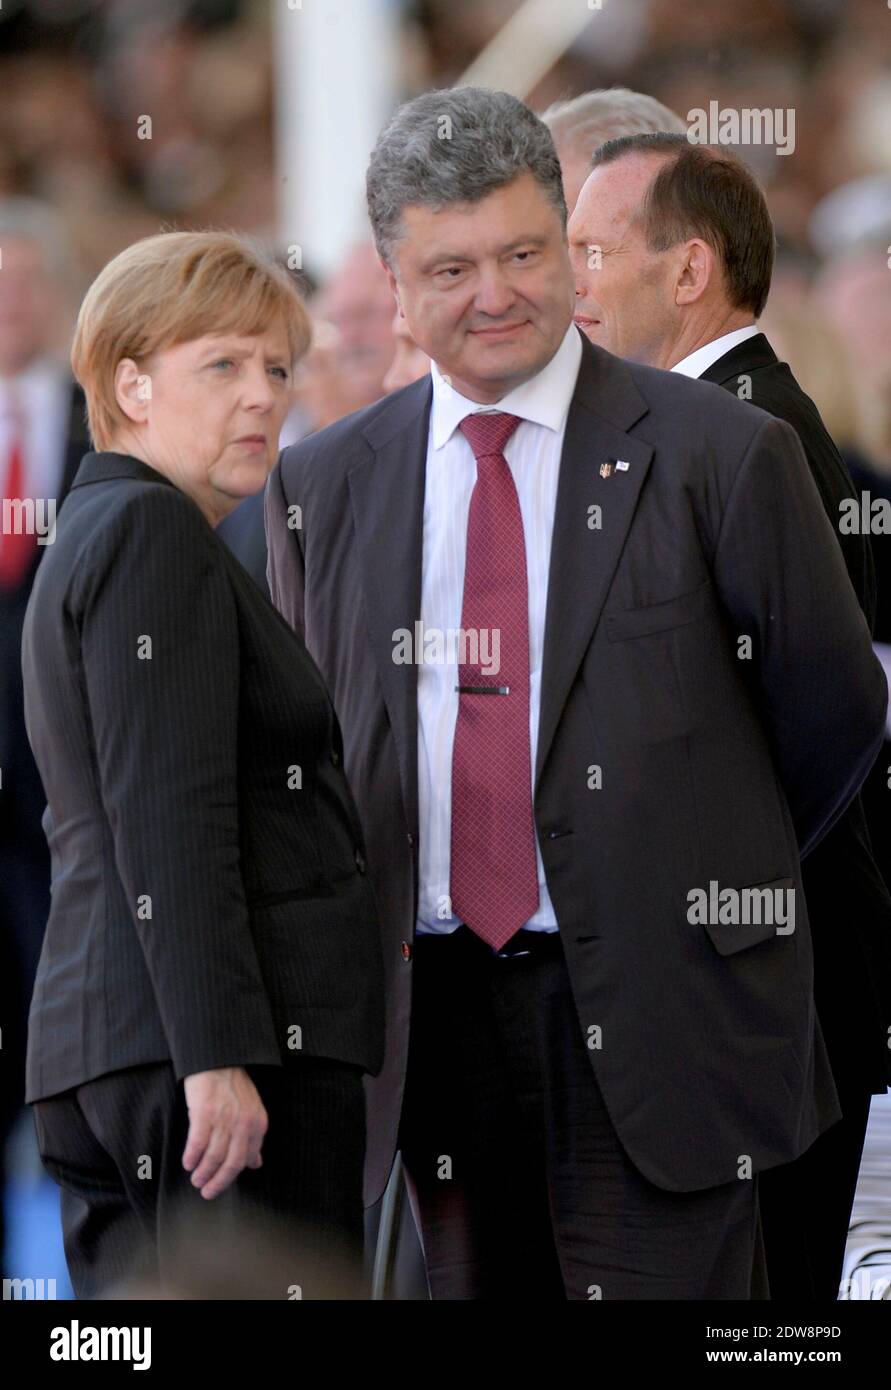 German Chancellor Angela Merkel and President of Ukraine, Petro Oleksiyovytch Porochenko attend the International Ceremony at Sword Beach in Ouistreham, as part of the official ceremonies on the occasion of the D-Day 70th Anniversary, on June 6, 2014 in Normandy, France. Photo by Abd Rabbo-Bernard-Gouhier-Mousse/ABACAPRESS.COM Stock Photo